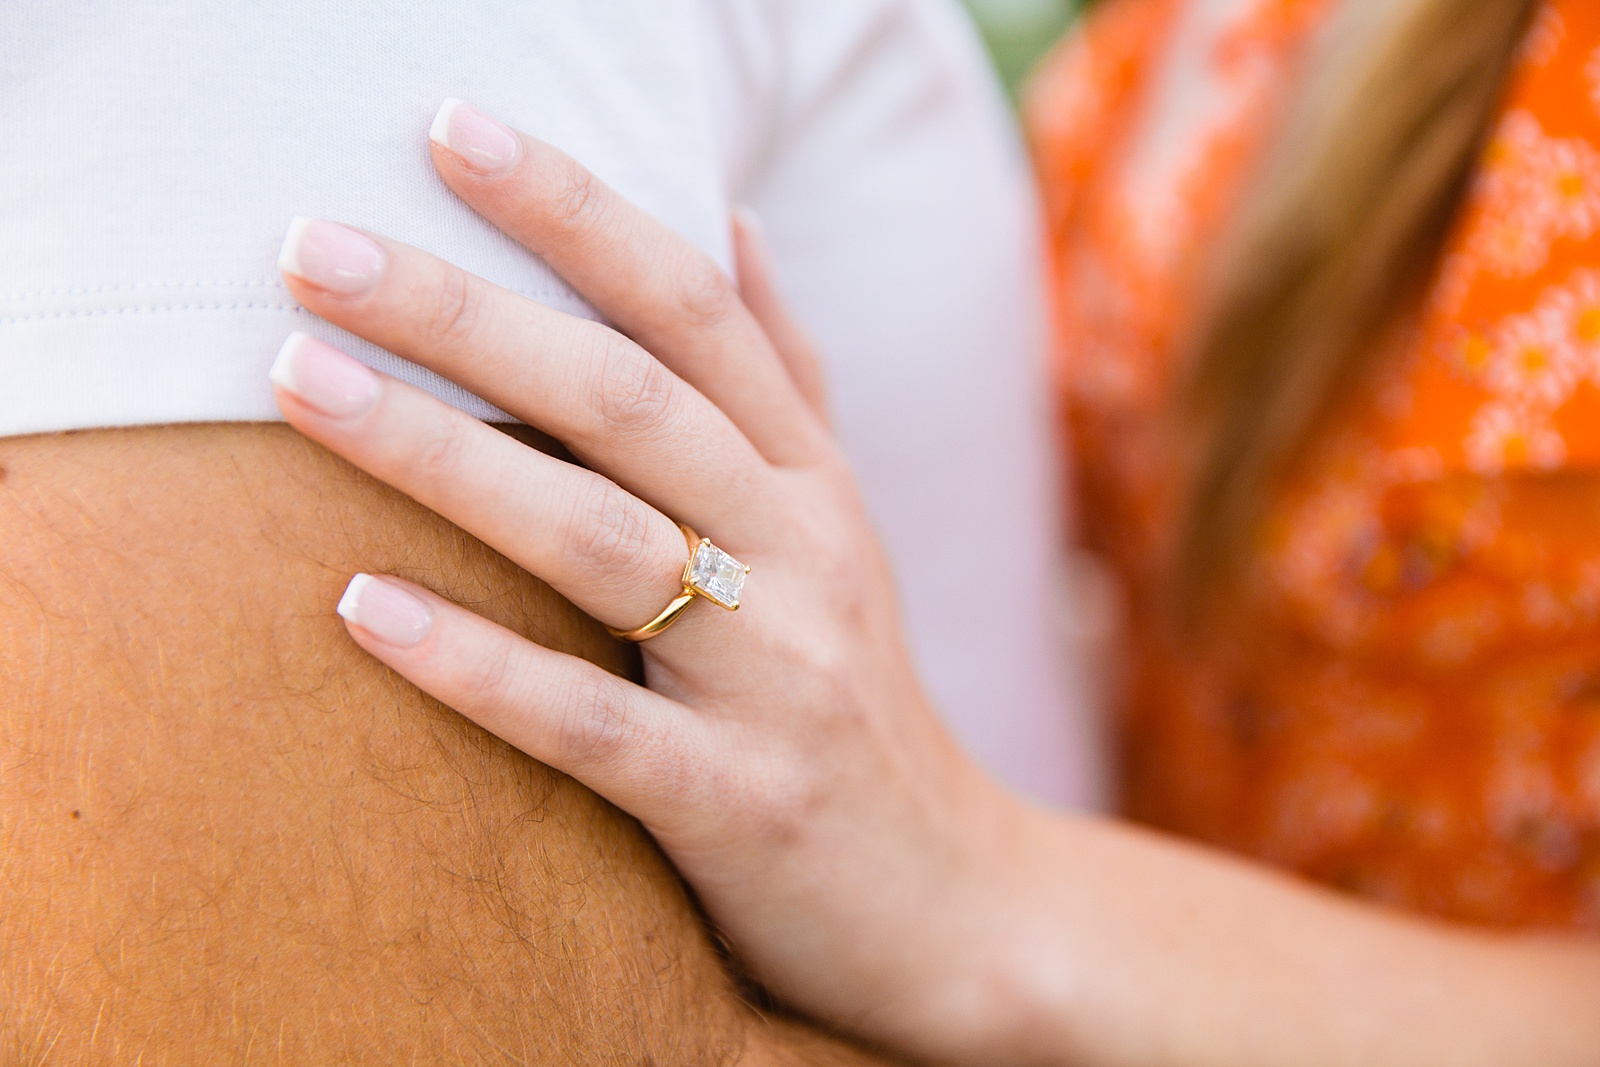 Detail image of engagement ring during during engagement session by PMA Photography.